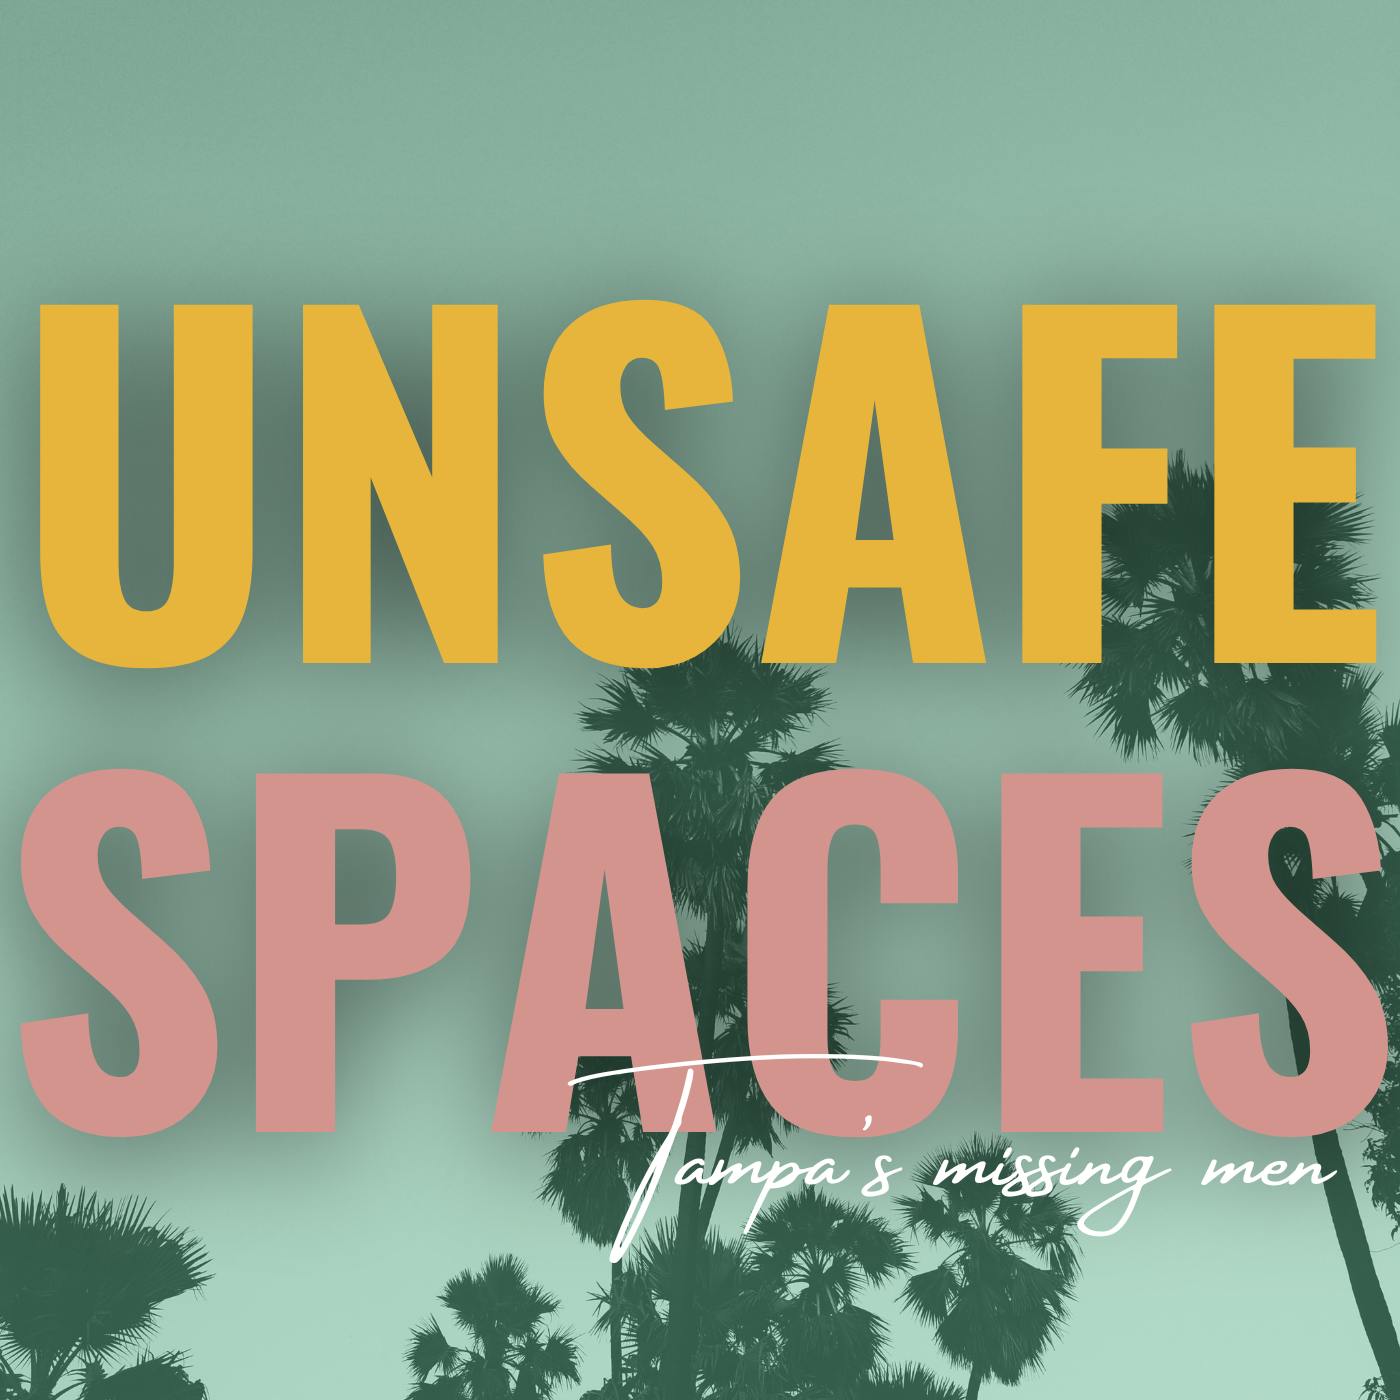 Introducing Unsafe Spaces: Tampa's Missing Men